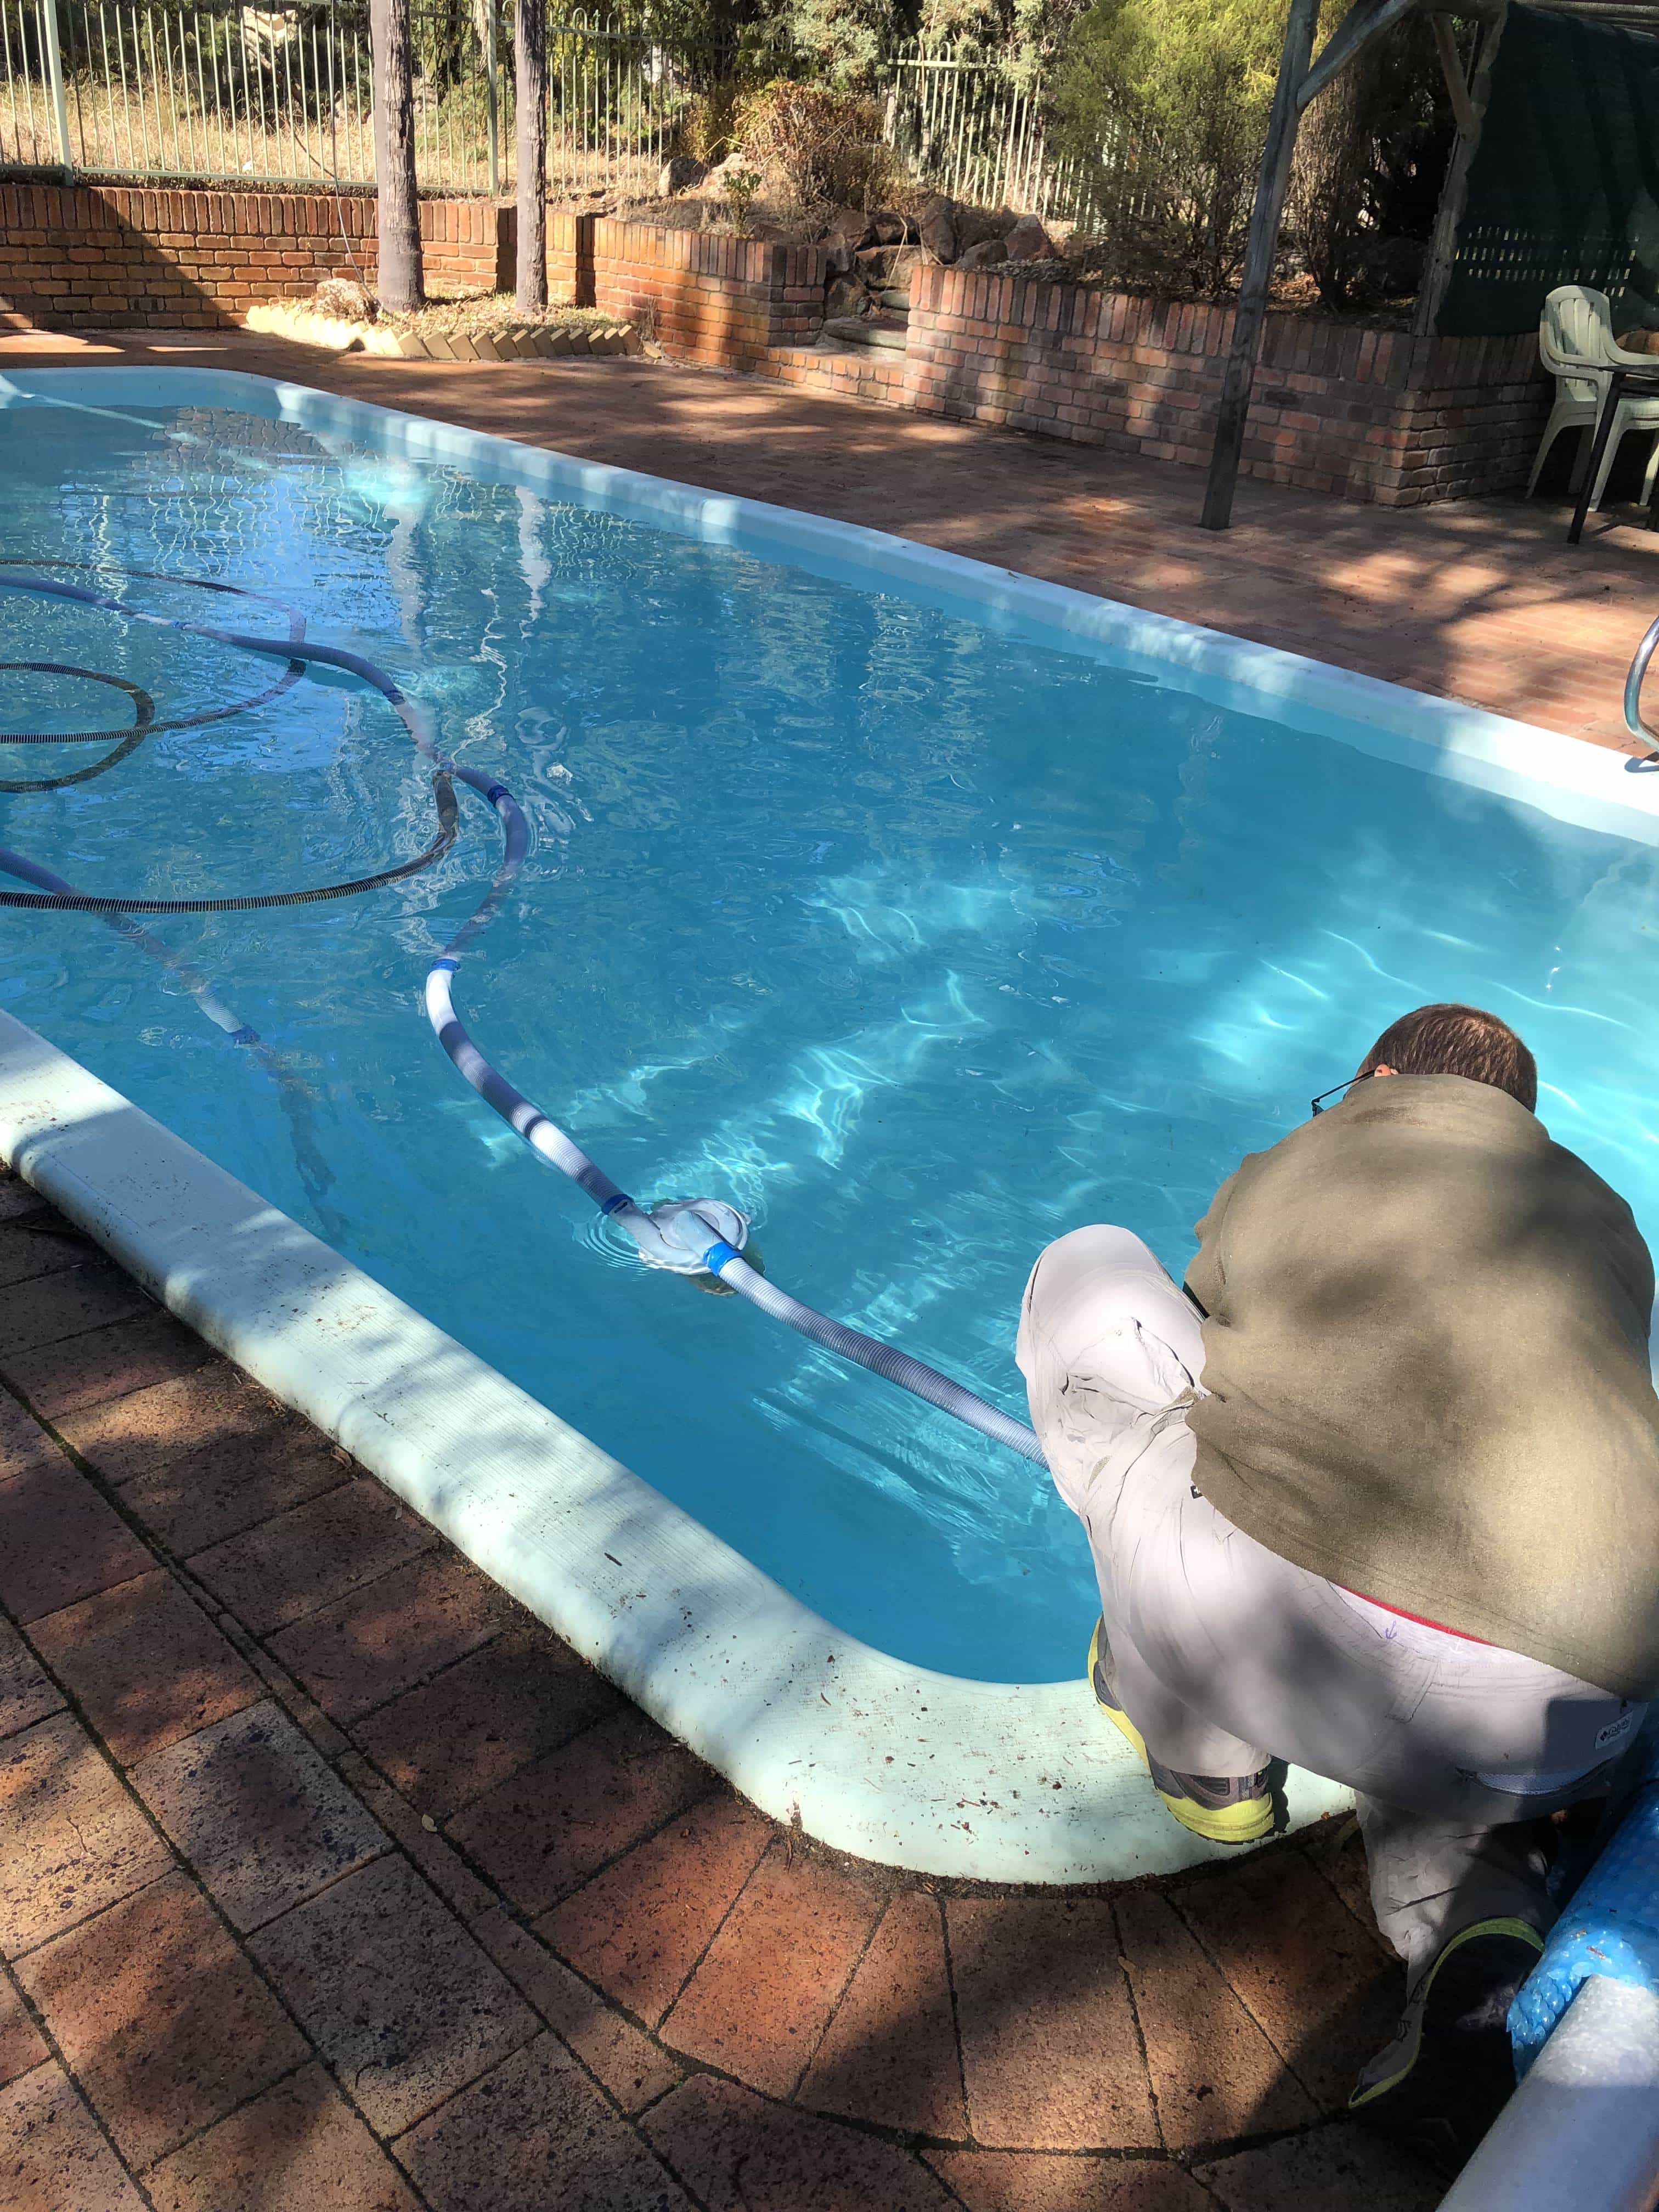 Cleaning the pool